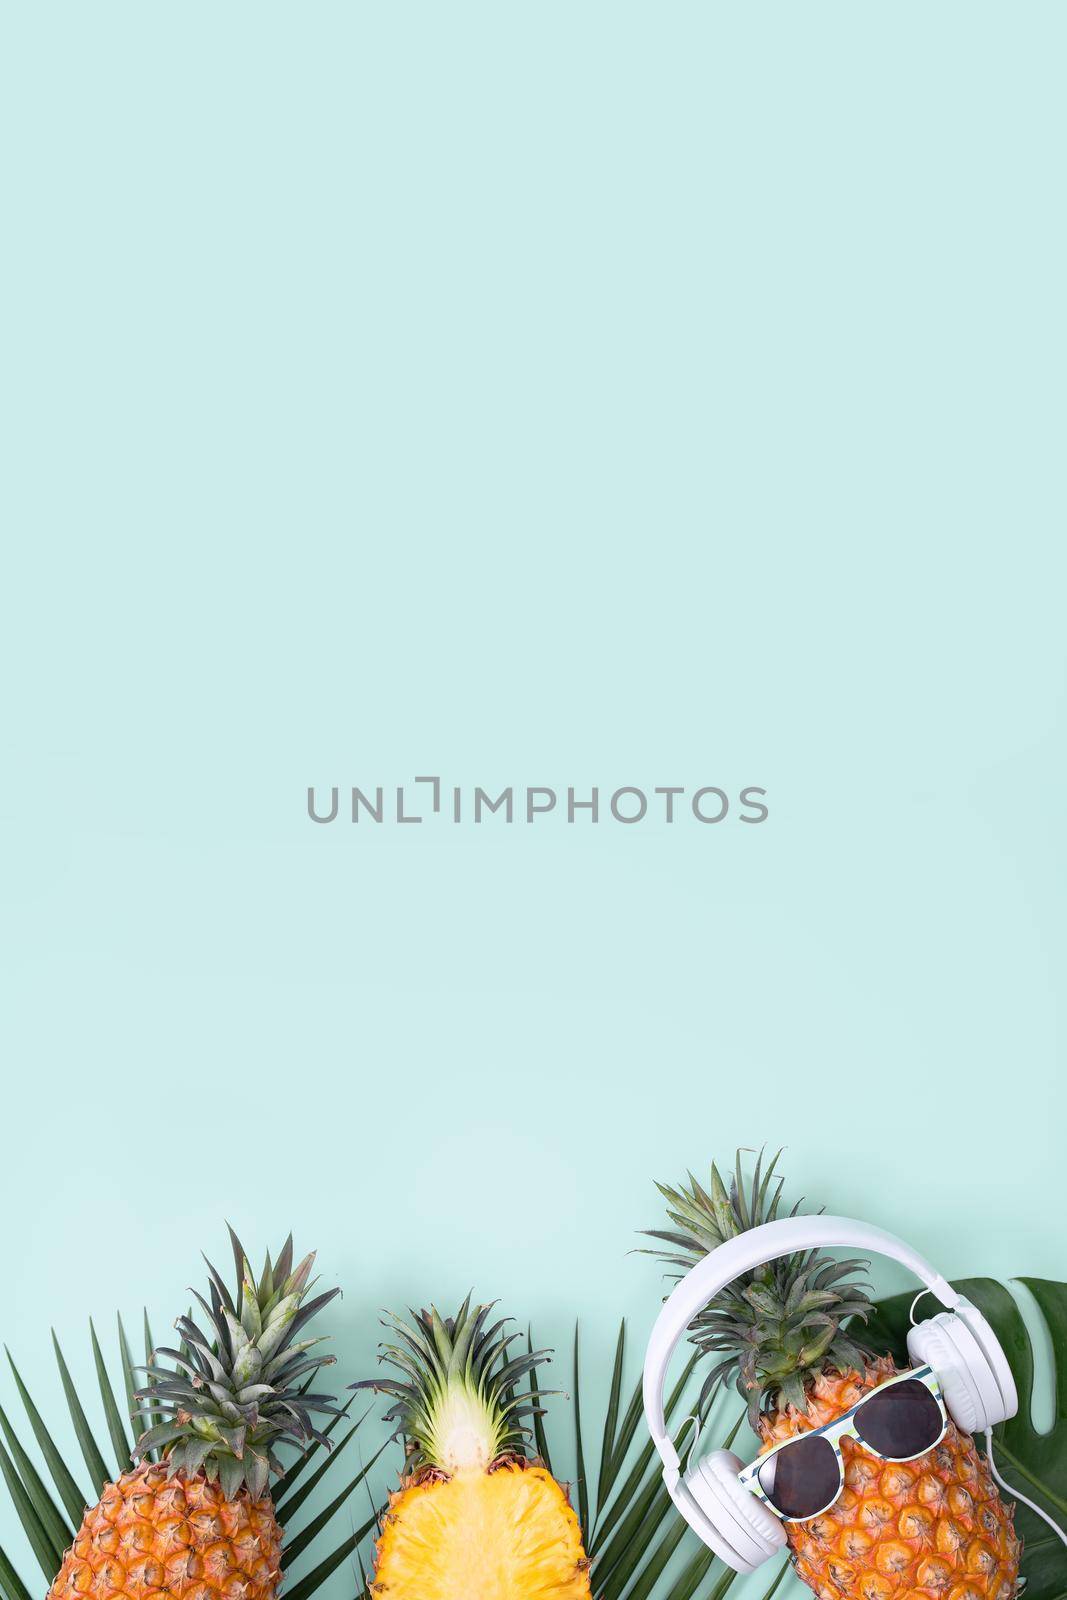 Funny pineapple wearing white headphone, concept of listening music, isolated on colored background with tropical palm leaves, top view, flat lay design. by ROMIXIMAGE